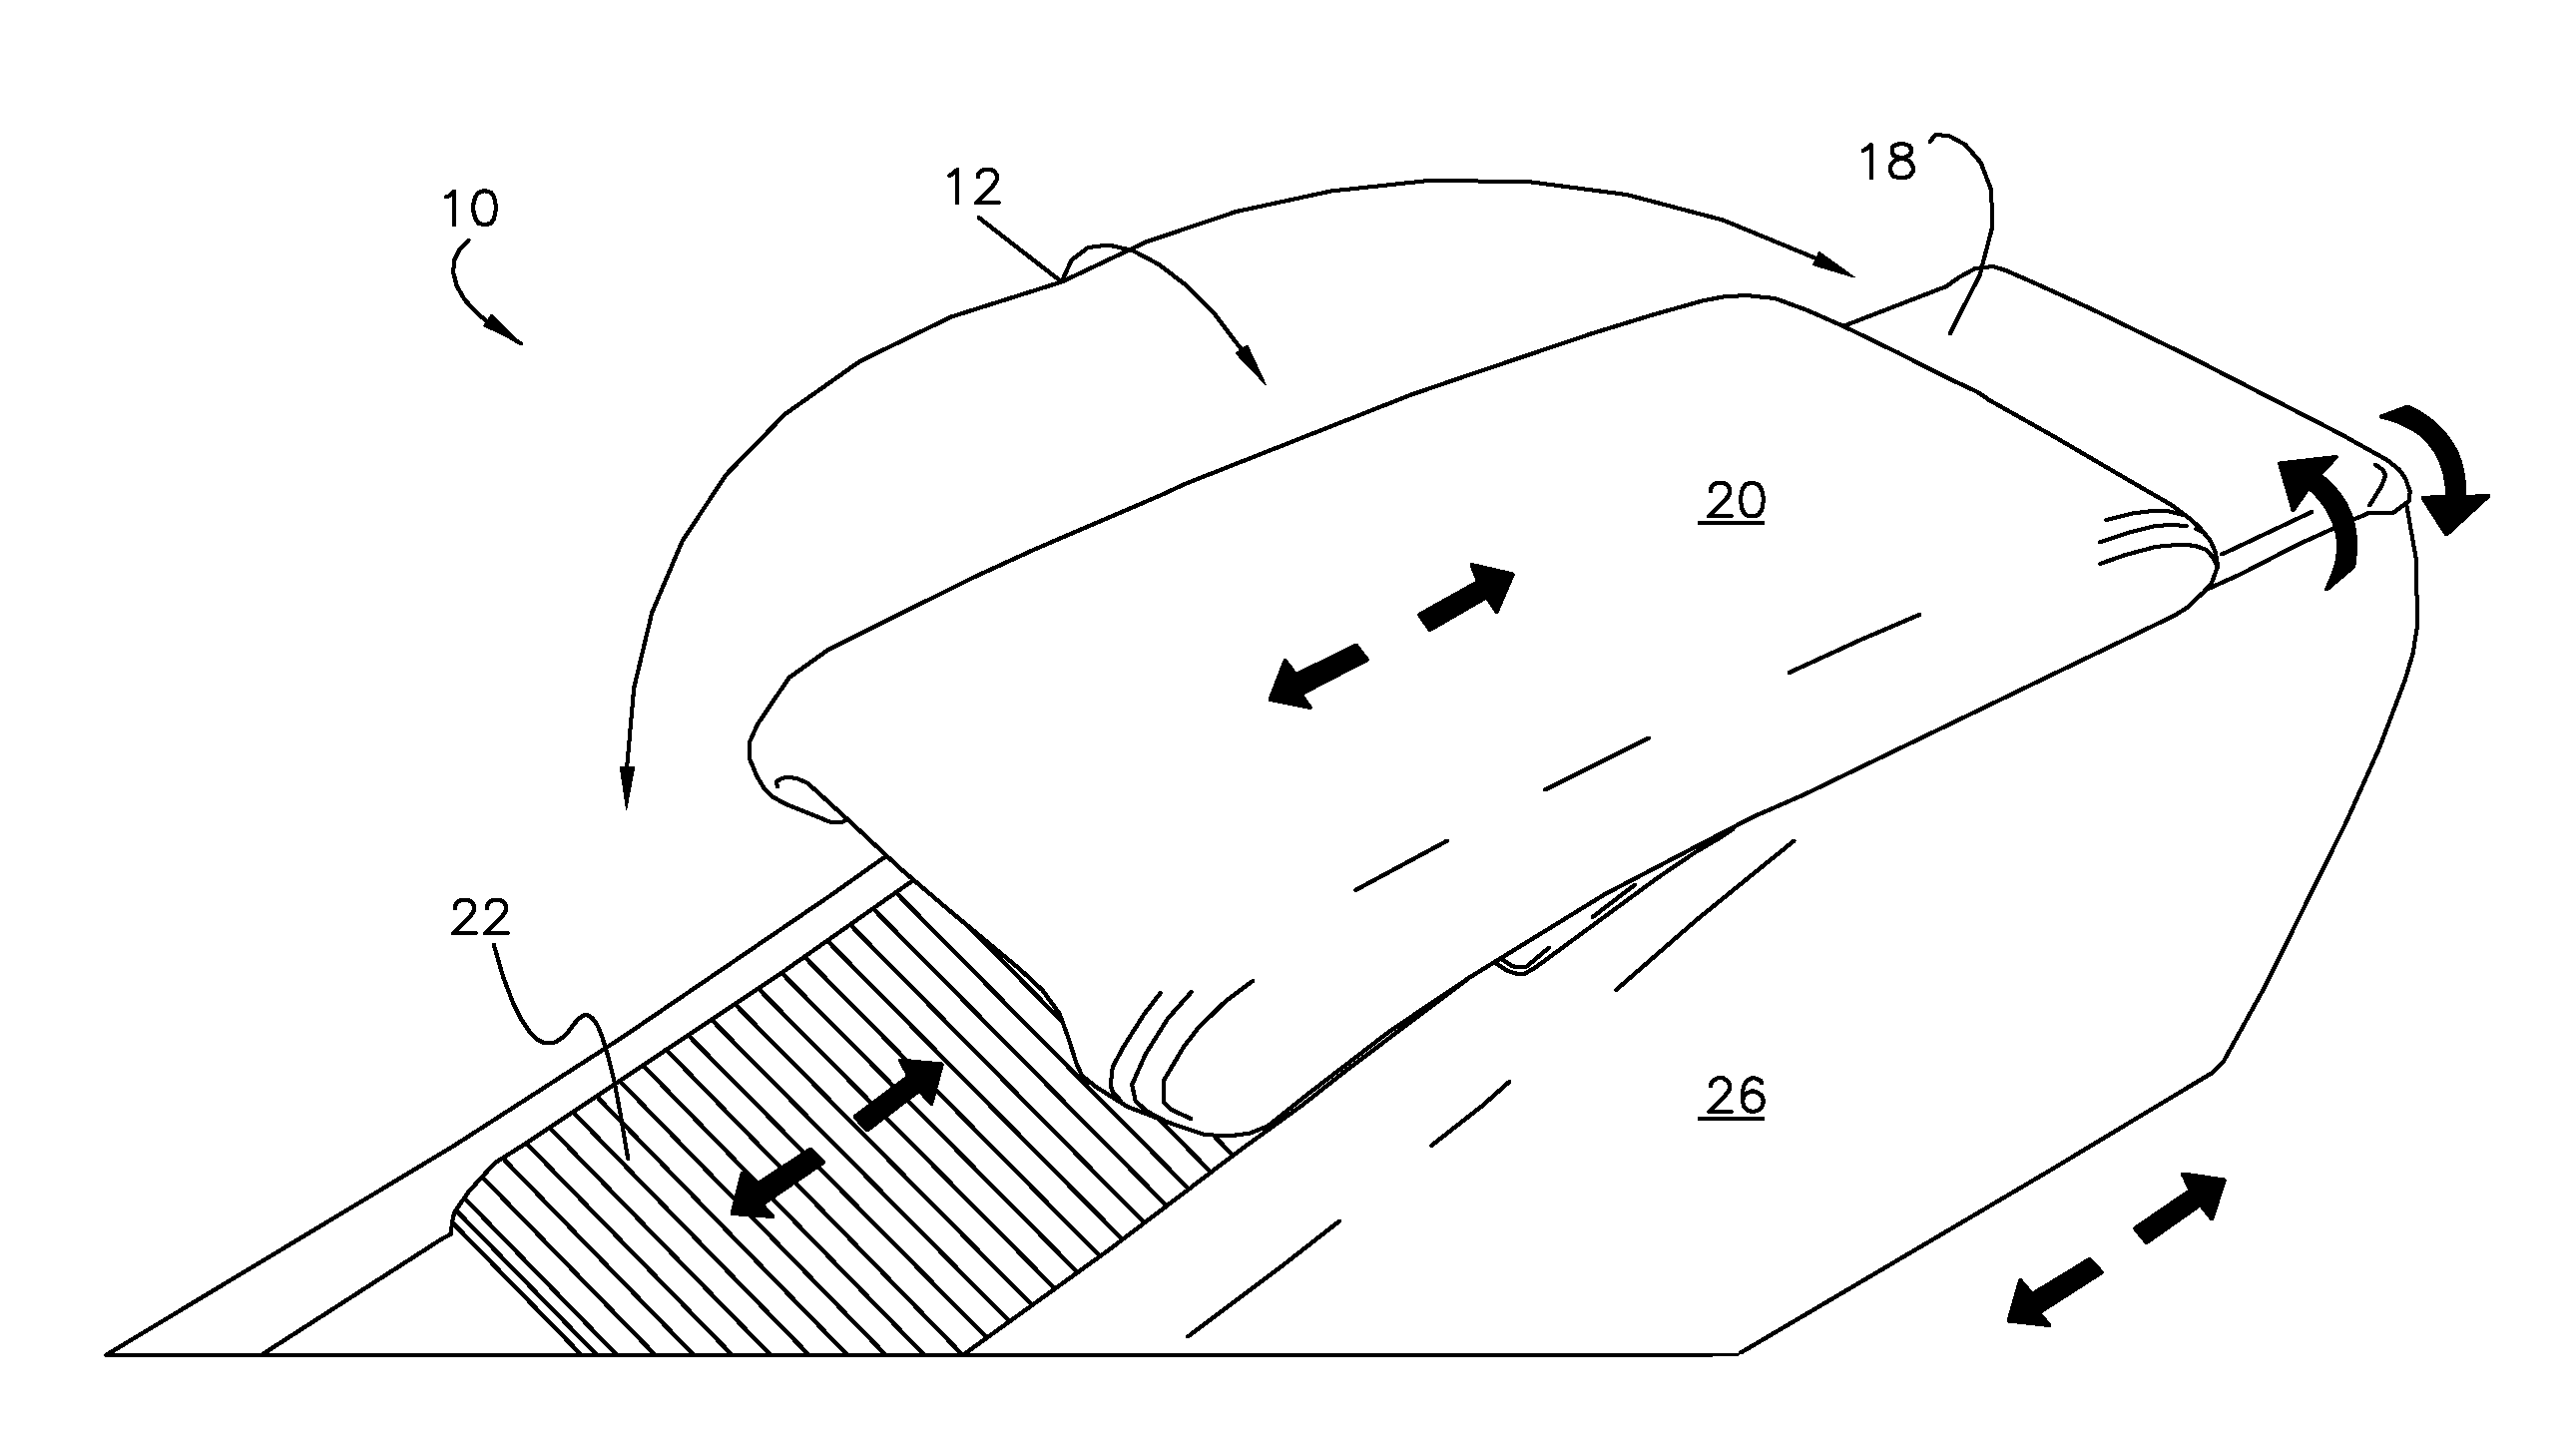 Manipulating center console components utilizing active material actuation